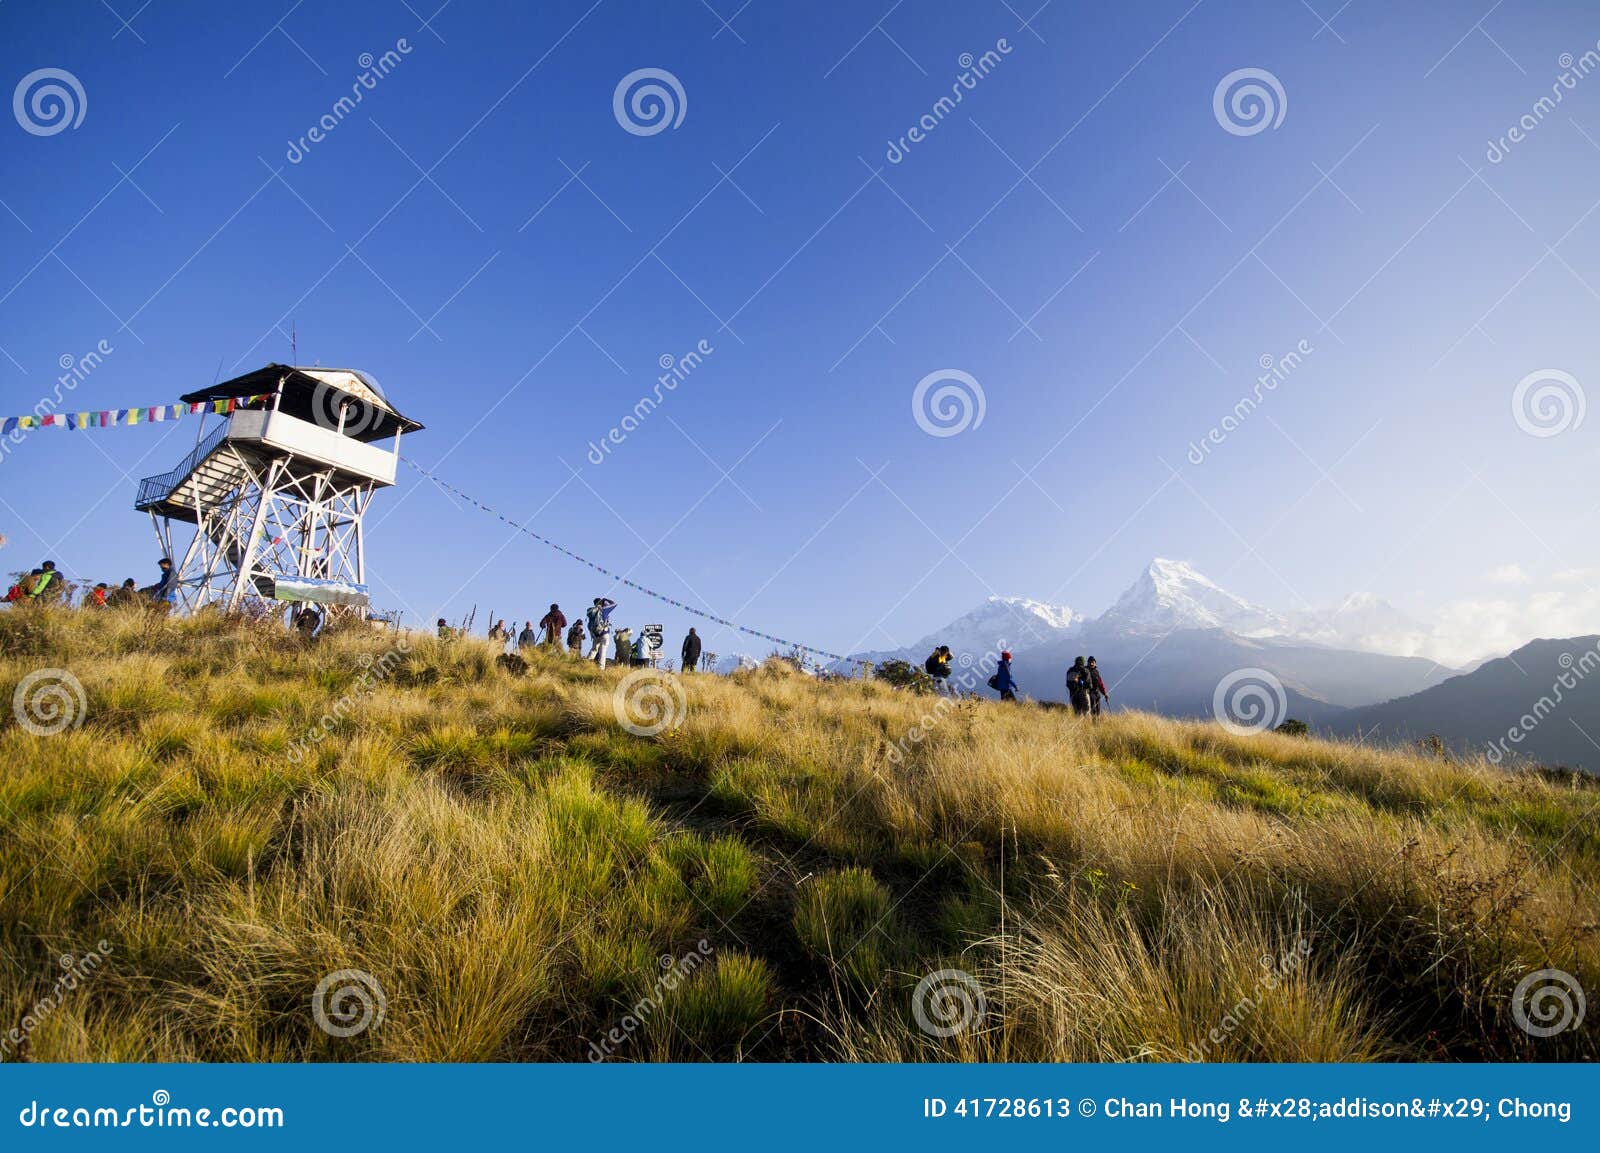 poon hill